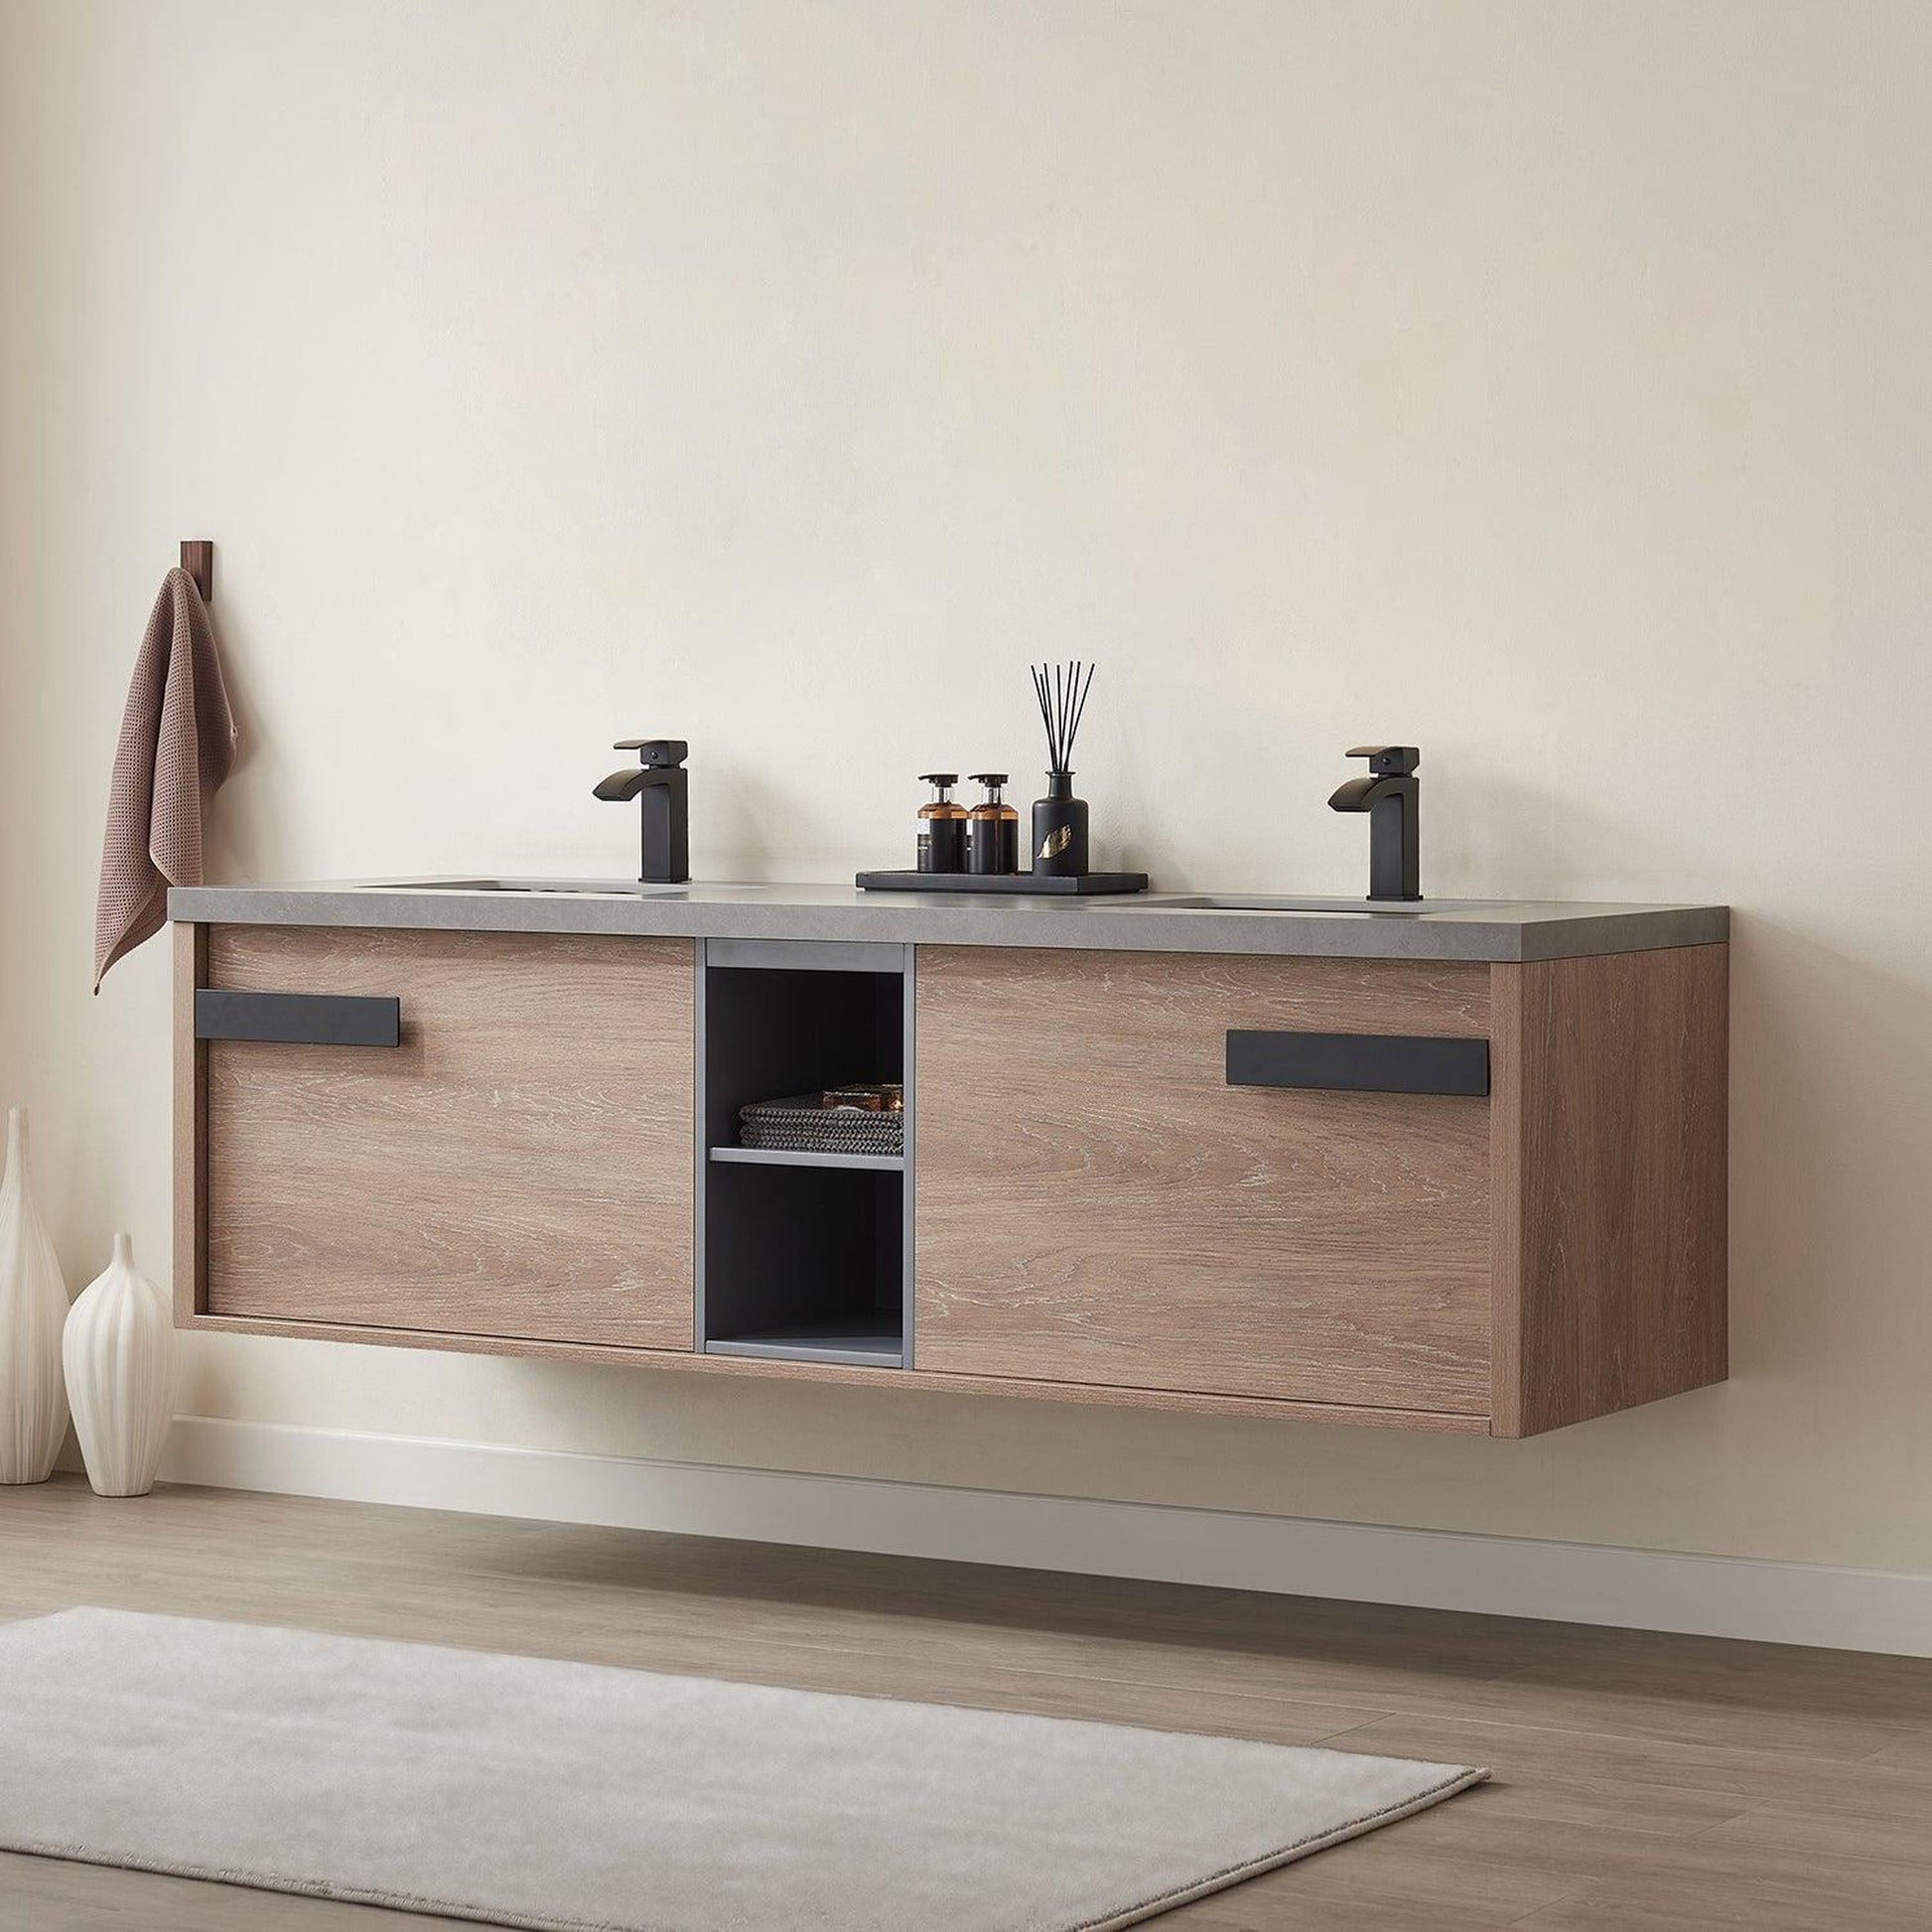 Vinnova Carcastillo 72" Double Sink Bath Vanity In North American Oak And Matte Black Hardware Finish With Grey Sintered Stone Top